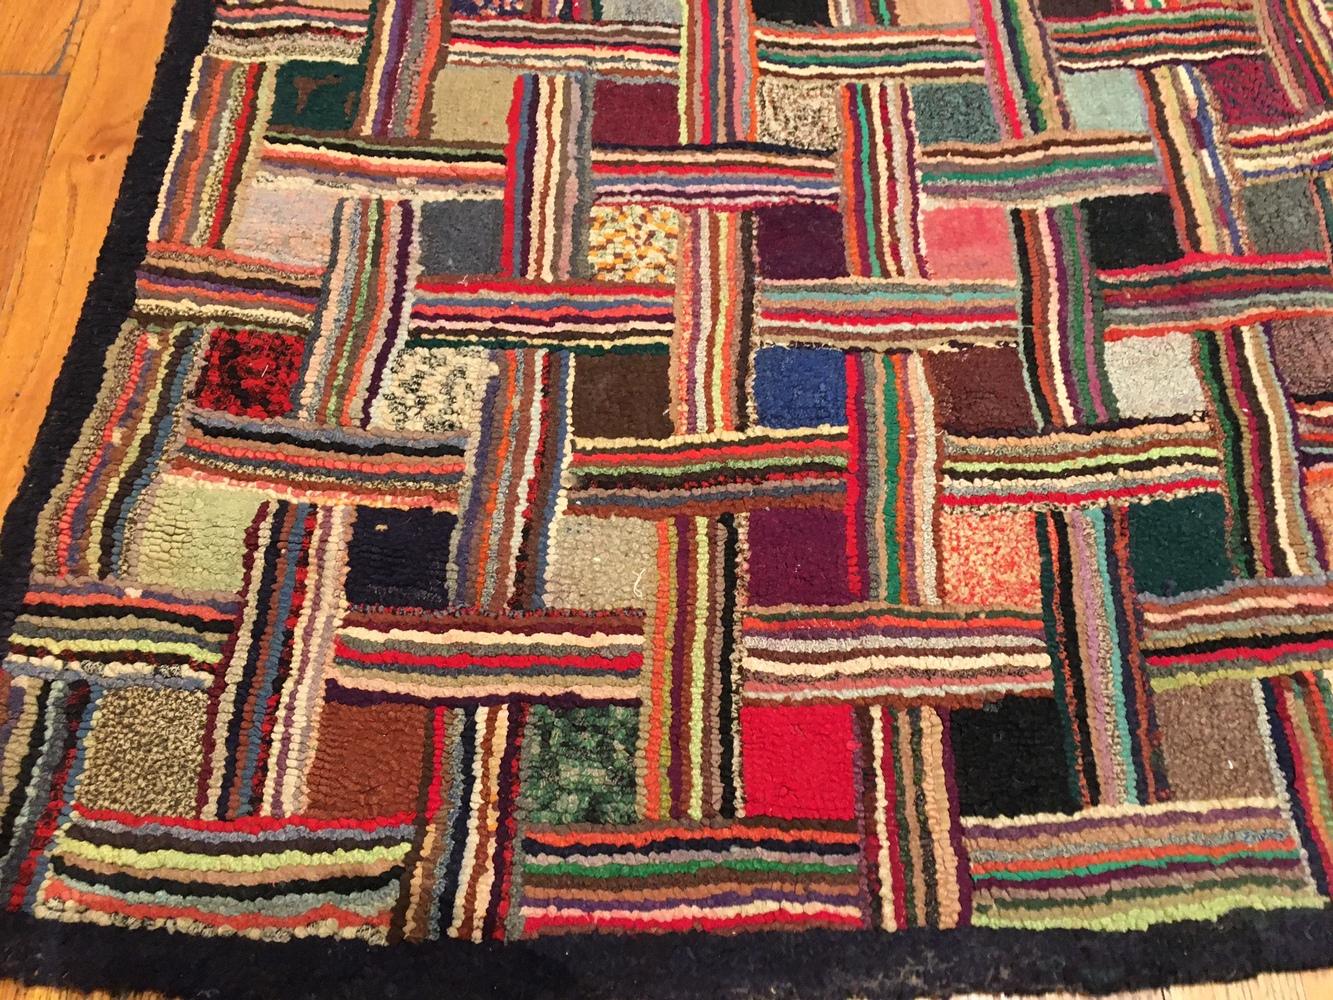 Hand-Crafted Early American Hooked Rug. Size: 8 ft 7 in x 12 ft 6 in (2.62 m x 3.81 m)